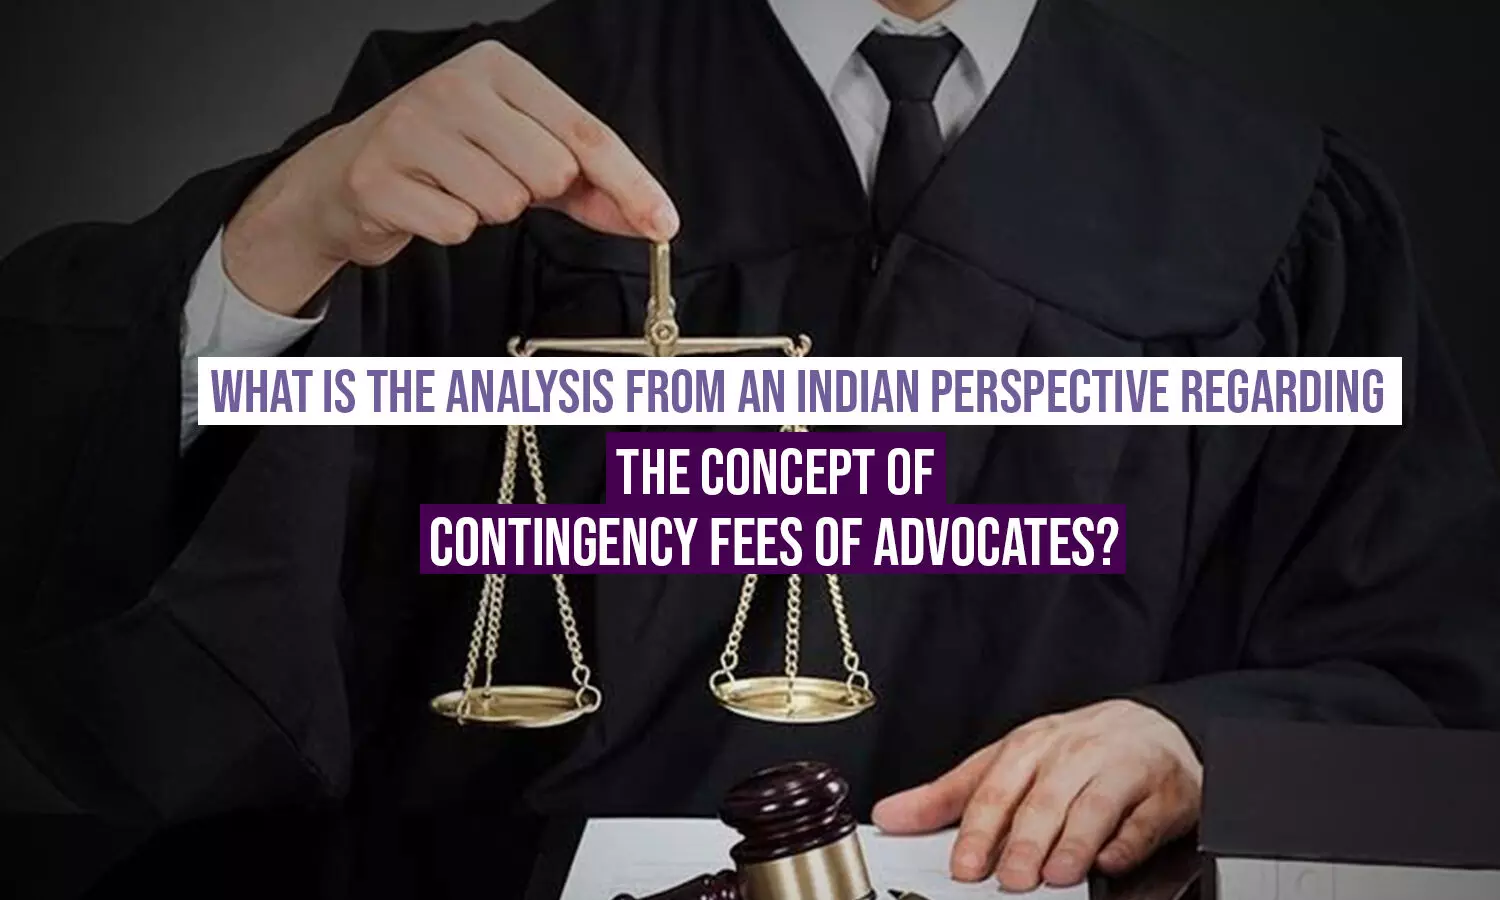 What Is The Analysis From An Indian Perspective Regarding The Concept of Contingency Fees of Advocates?